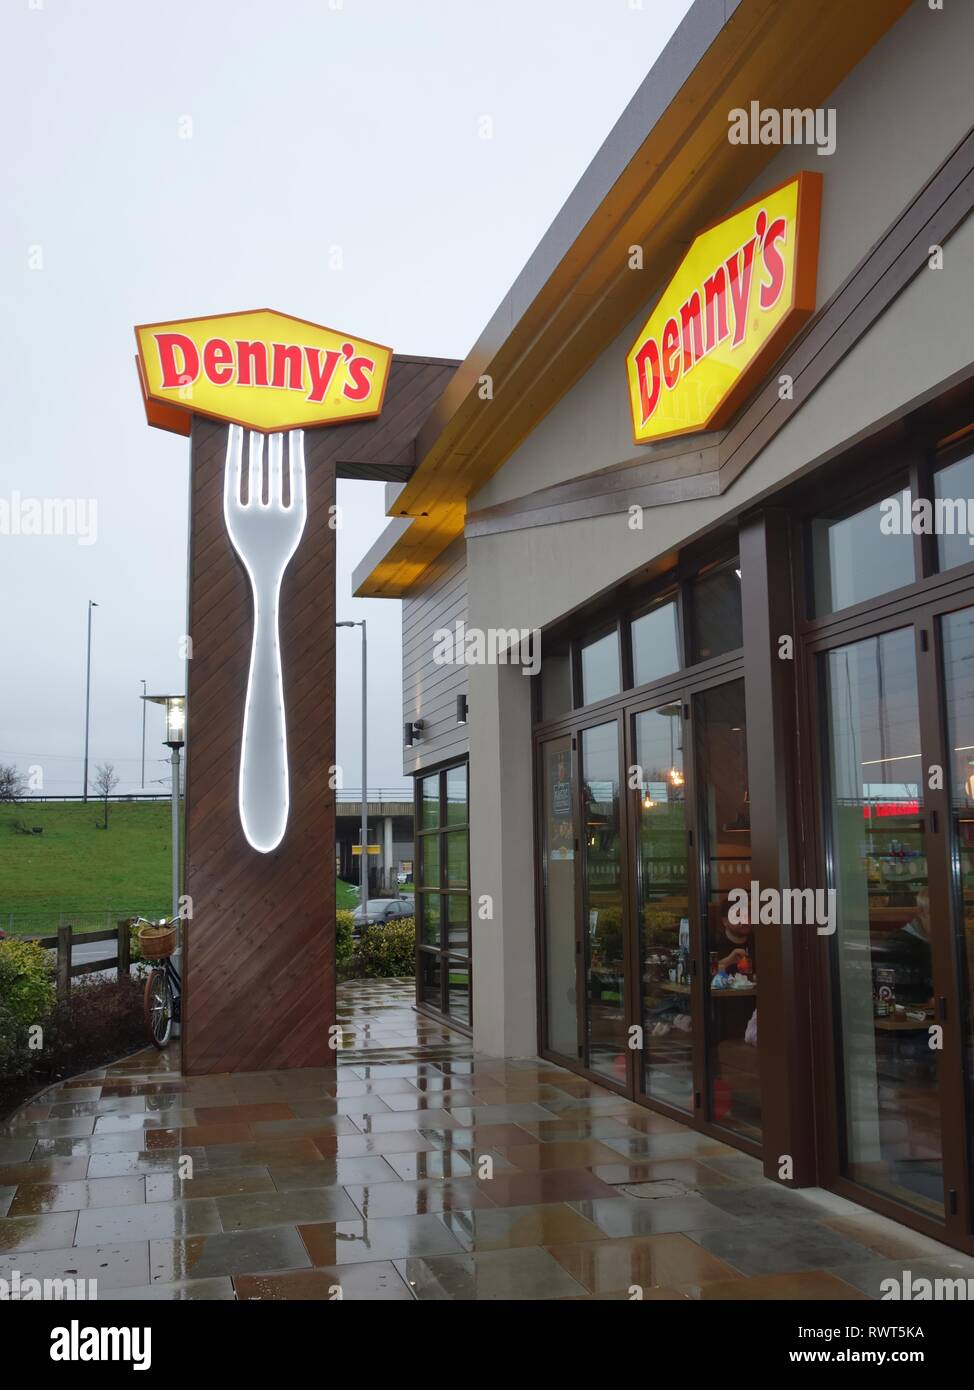 A long awaited American food chain restaurant, Denny's, opened for business in 2018 in Hillington, Glasgow Scotland, UK Stock Photo